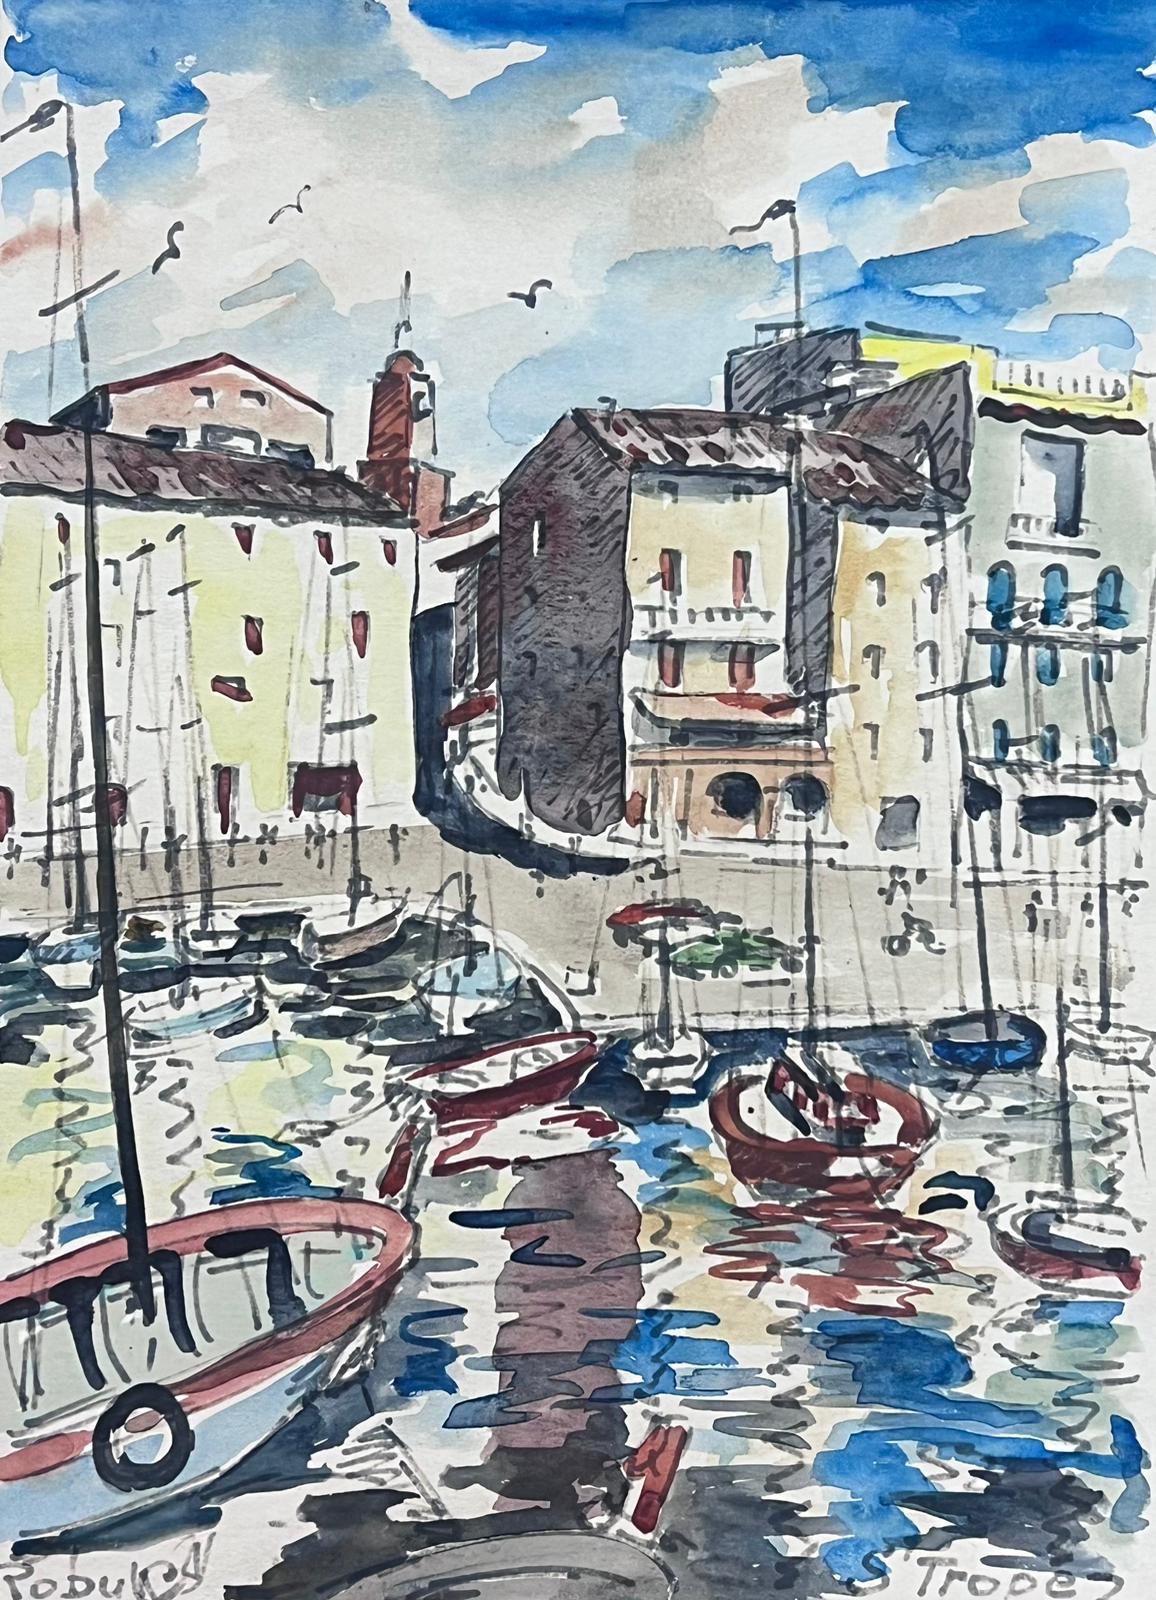 French School Landscape Art - St Tropez Harbour 1960's Original French Watercolor Painting Signed & dated